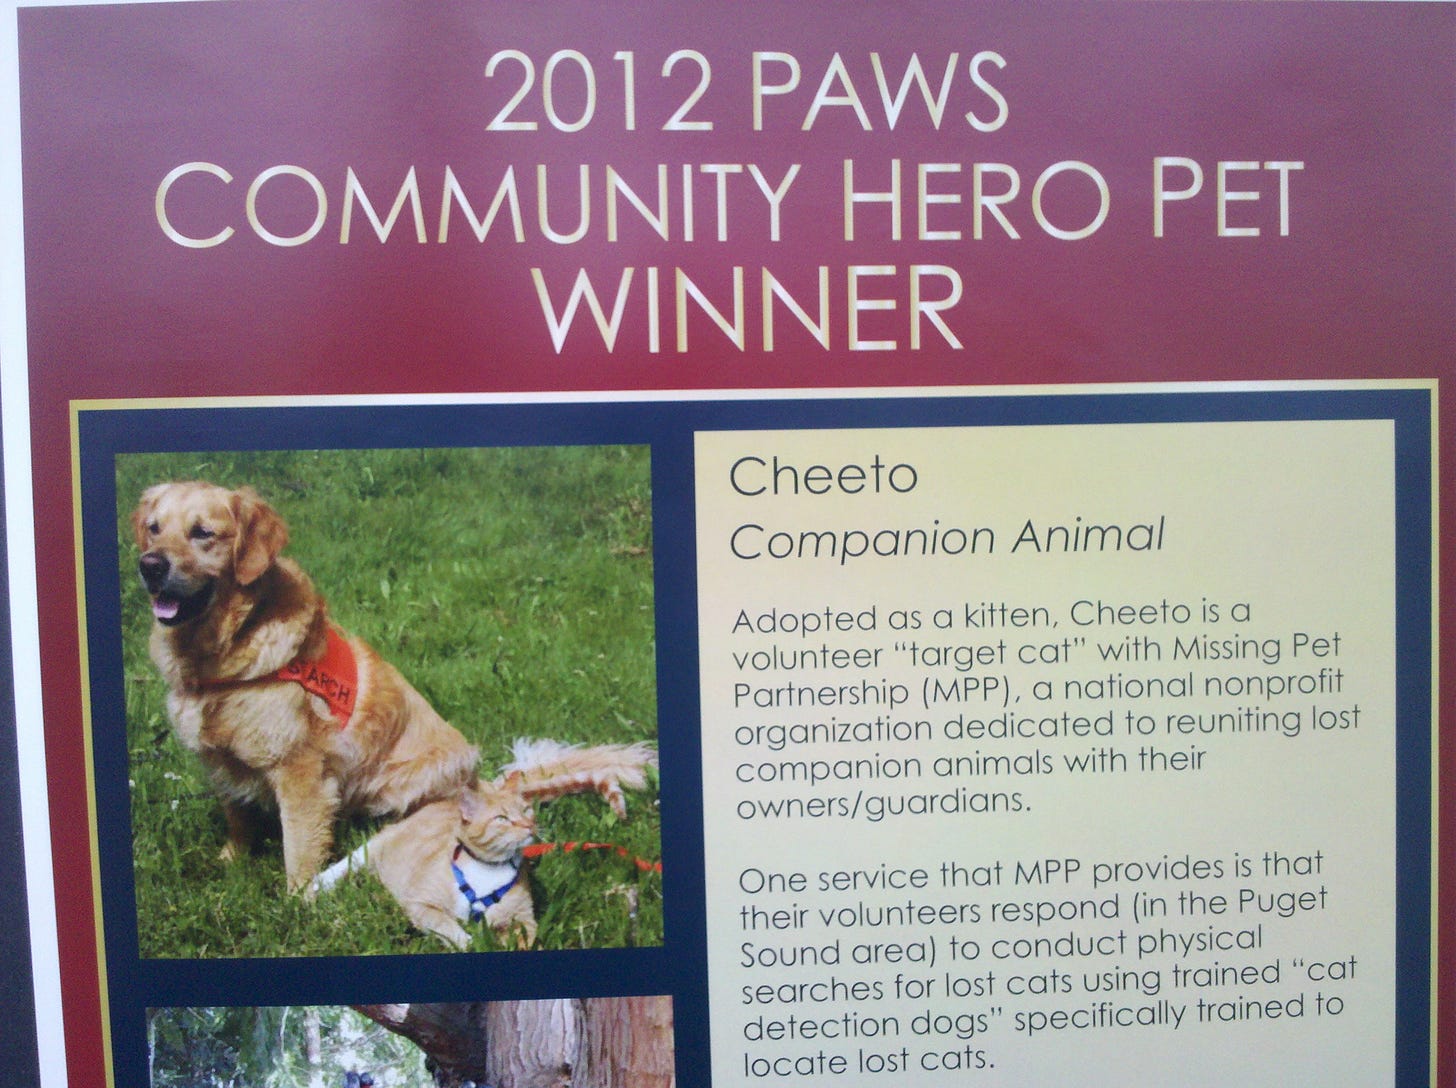 Plaque that shows photo of cat Cheeto and "2012 PAWS COMMUNITY AWARD WINNER"